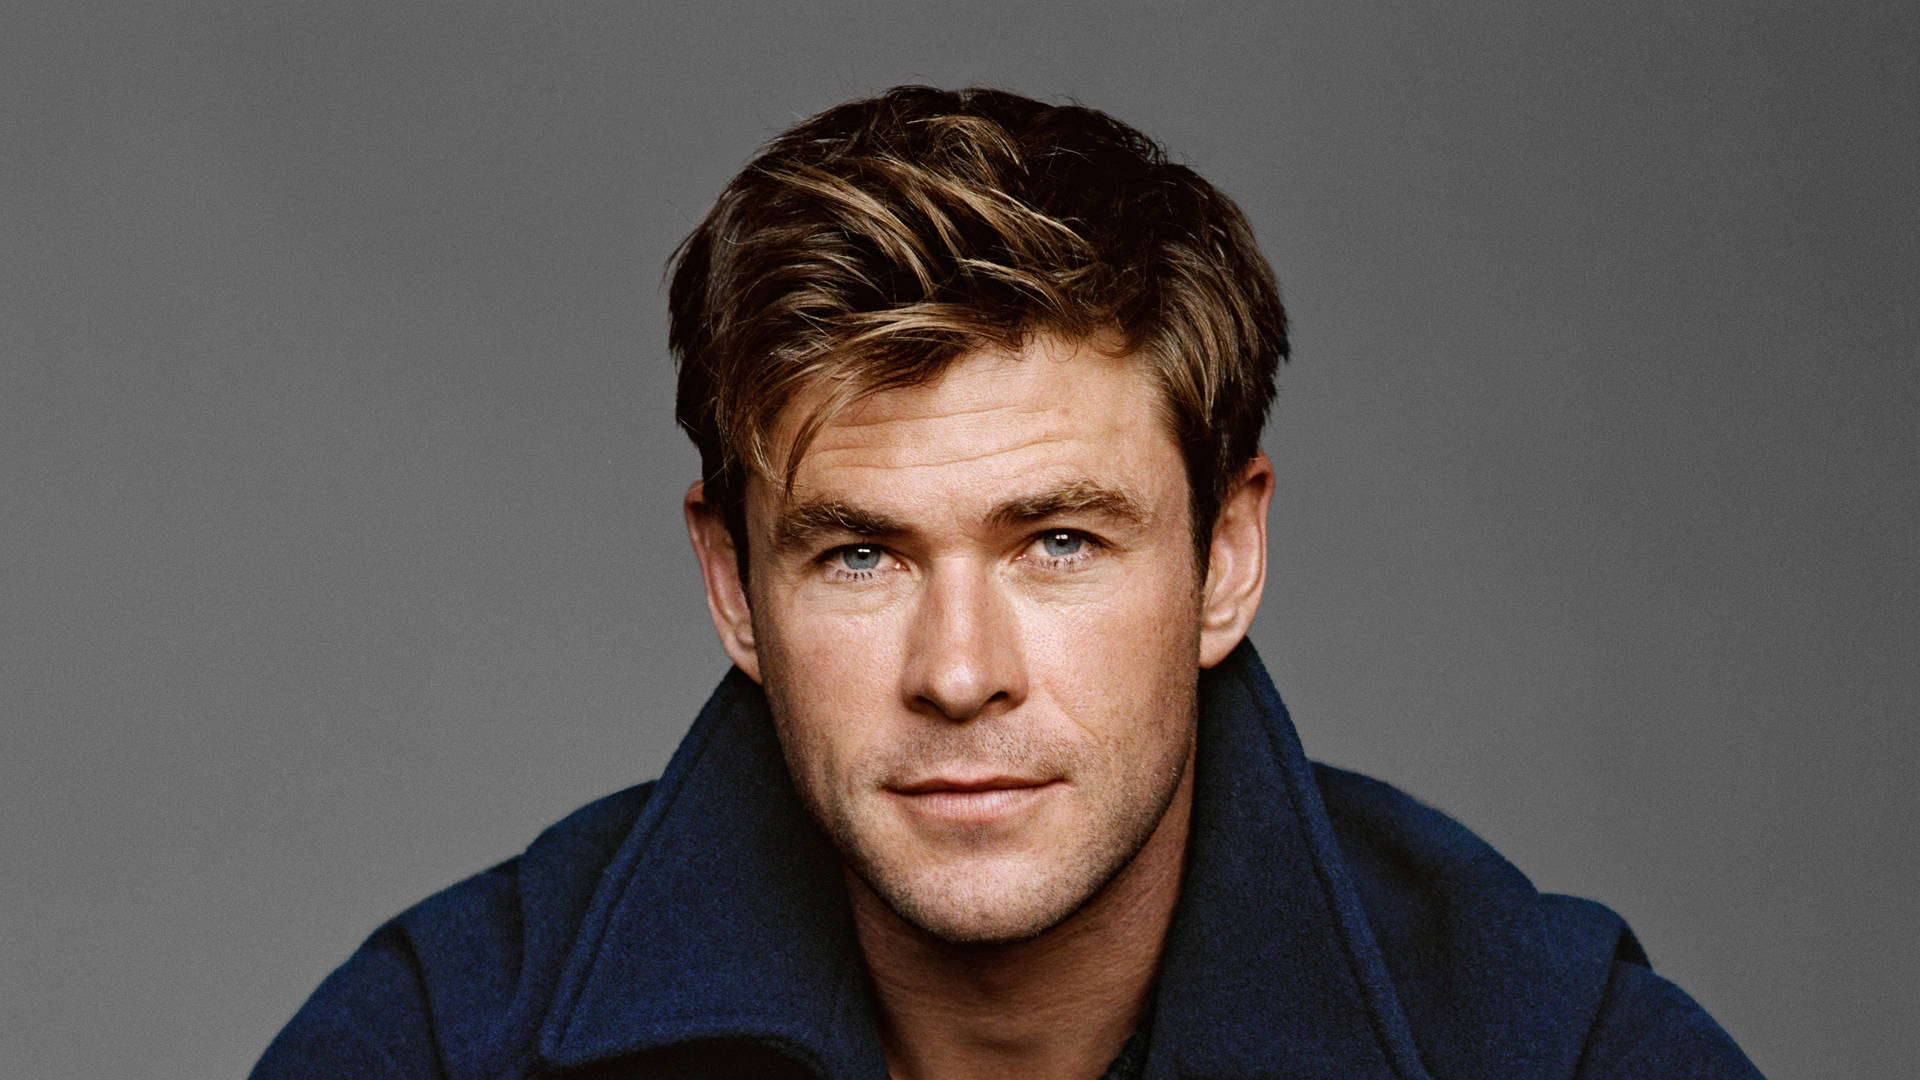 Chris Hemsworth Strikes A Pose In A Blue Jacket.